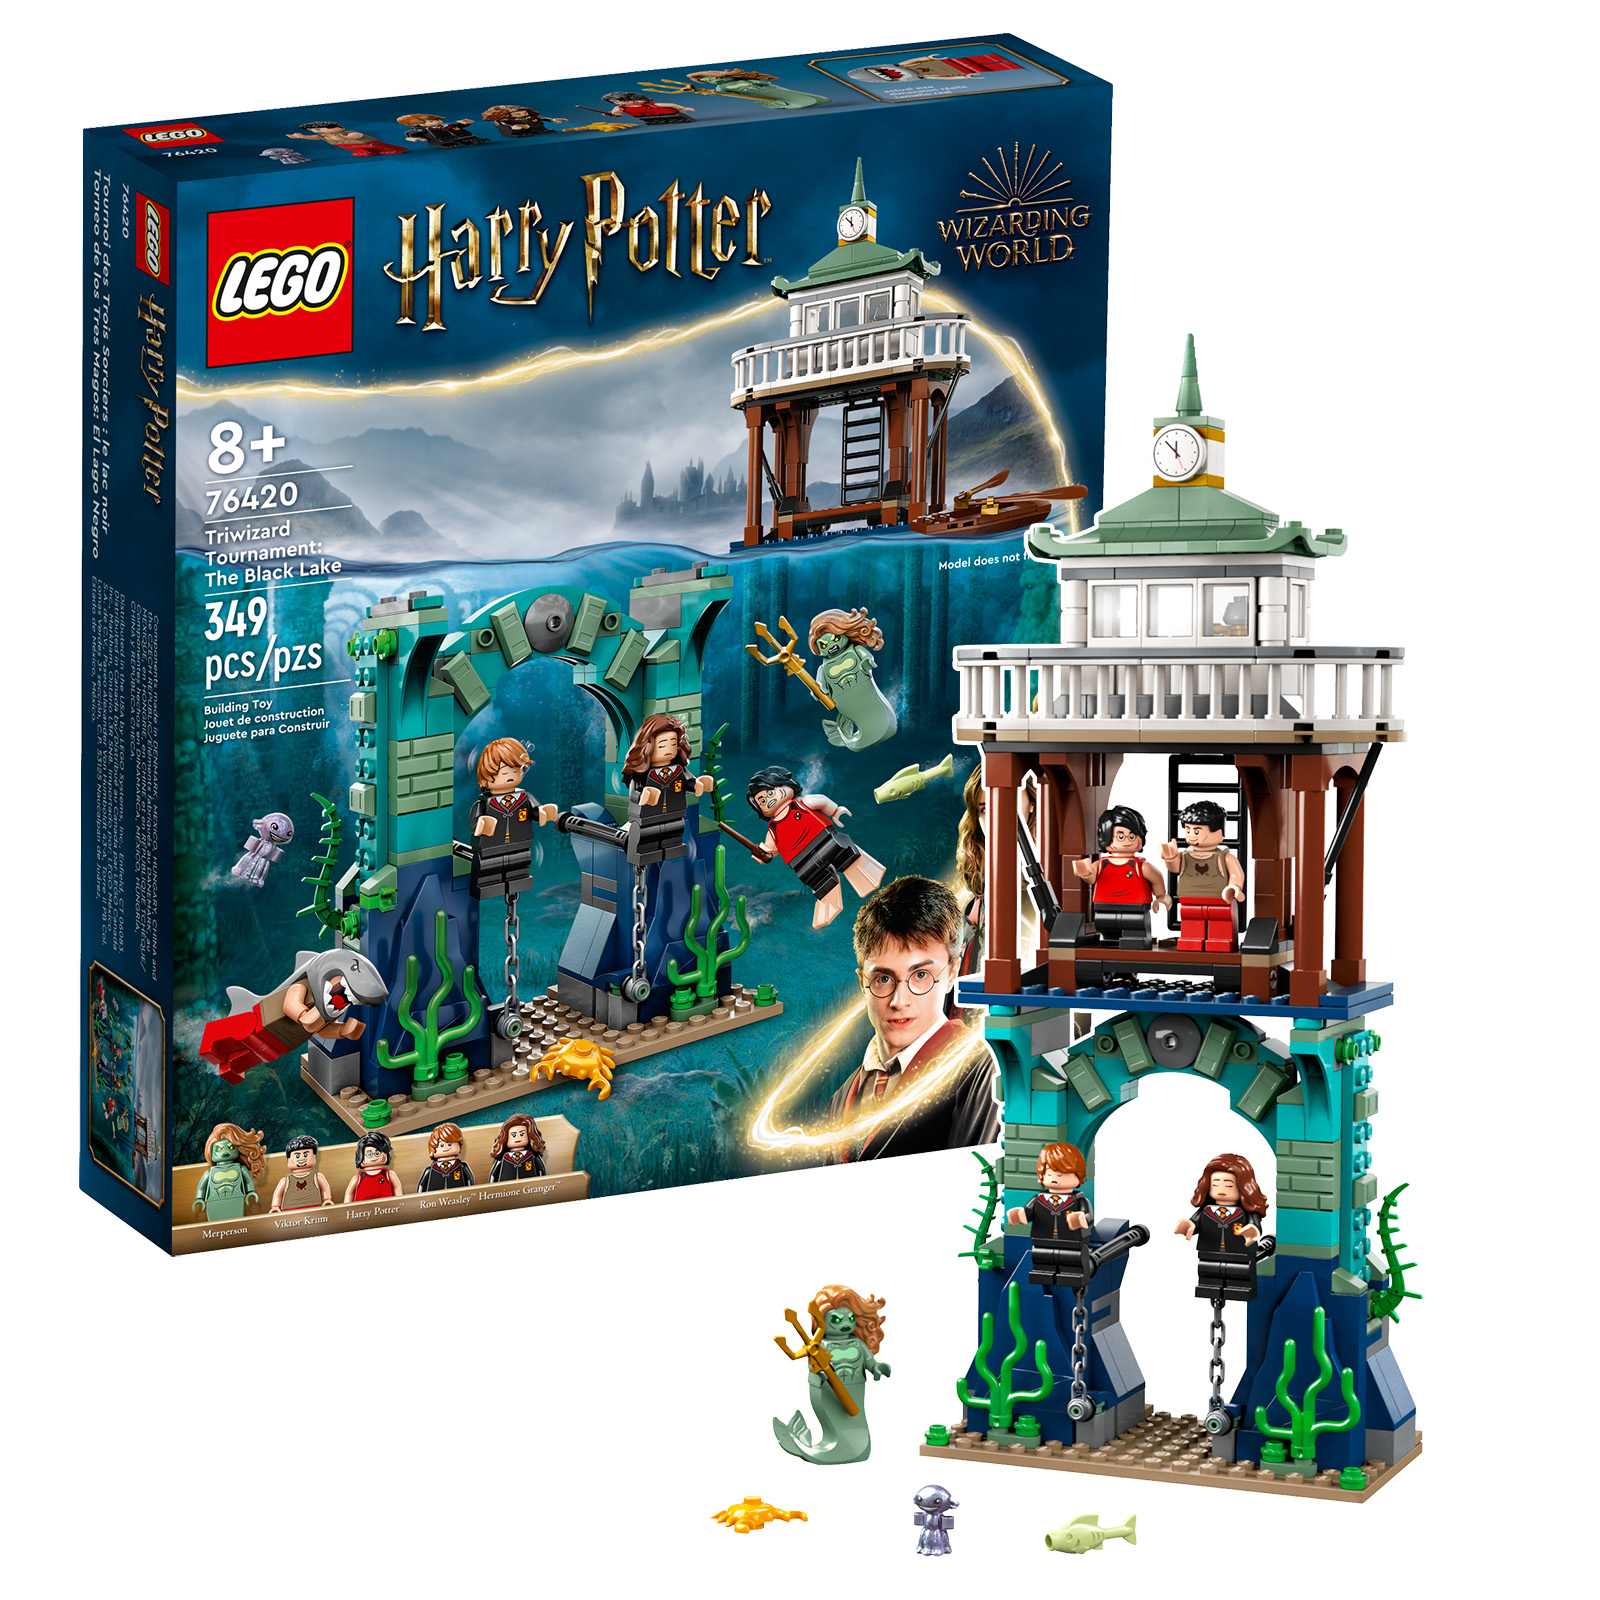 ▻ LEGO Harry novelties the first half of 2023: the sets are online on the Shop BRICKS